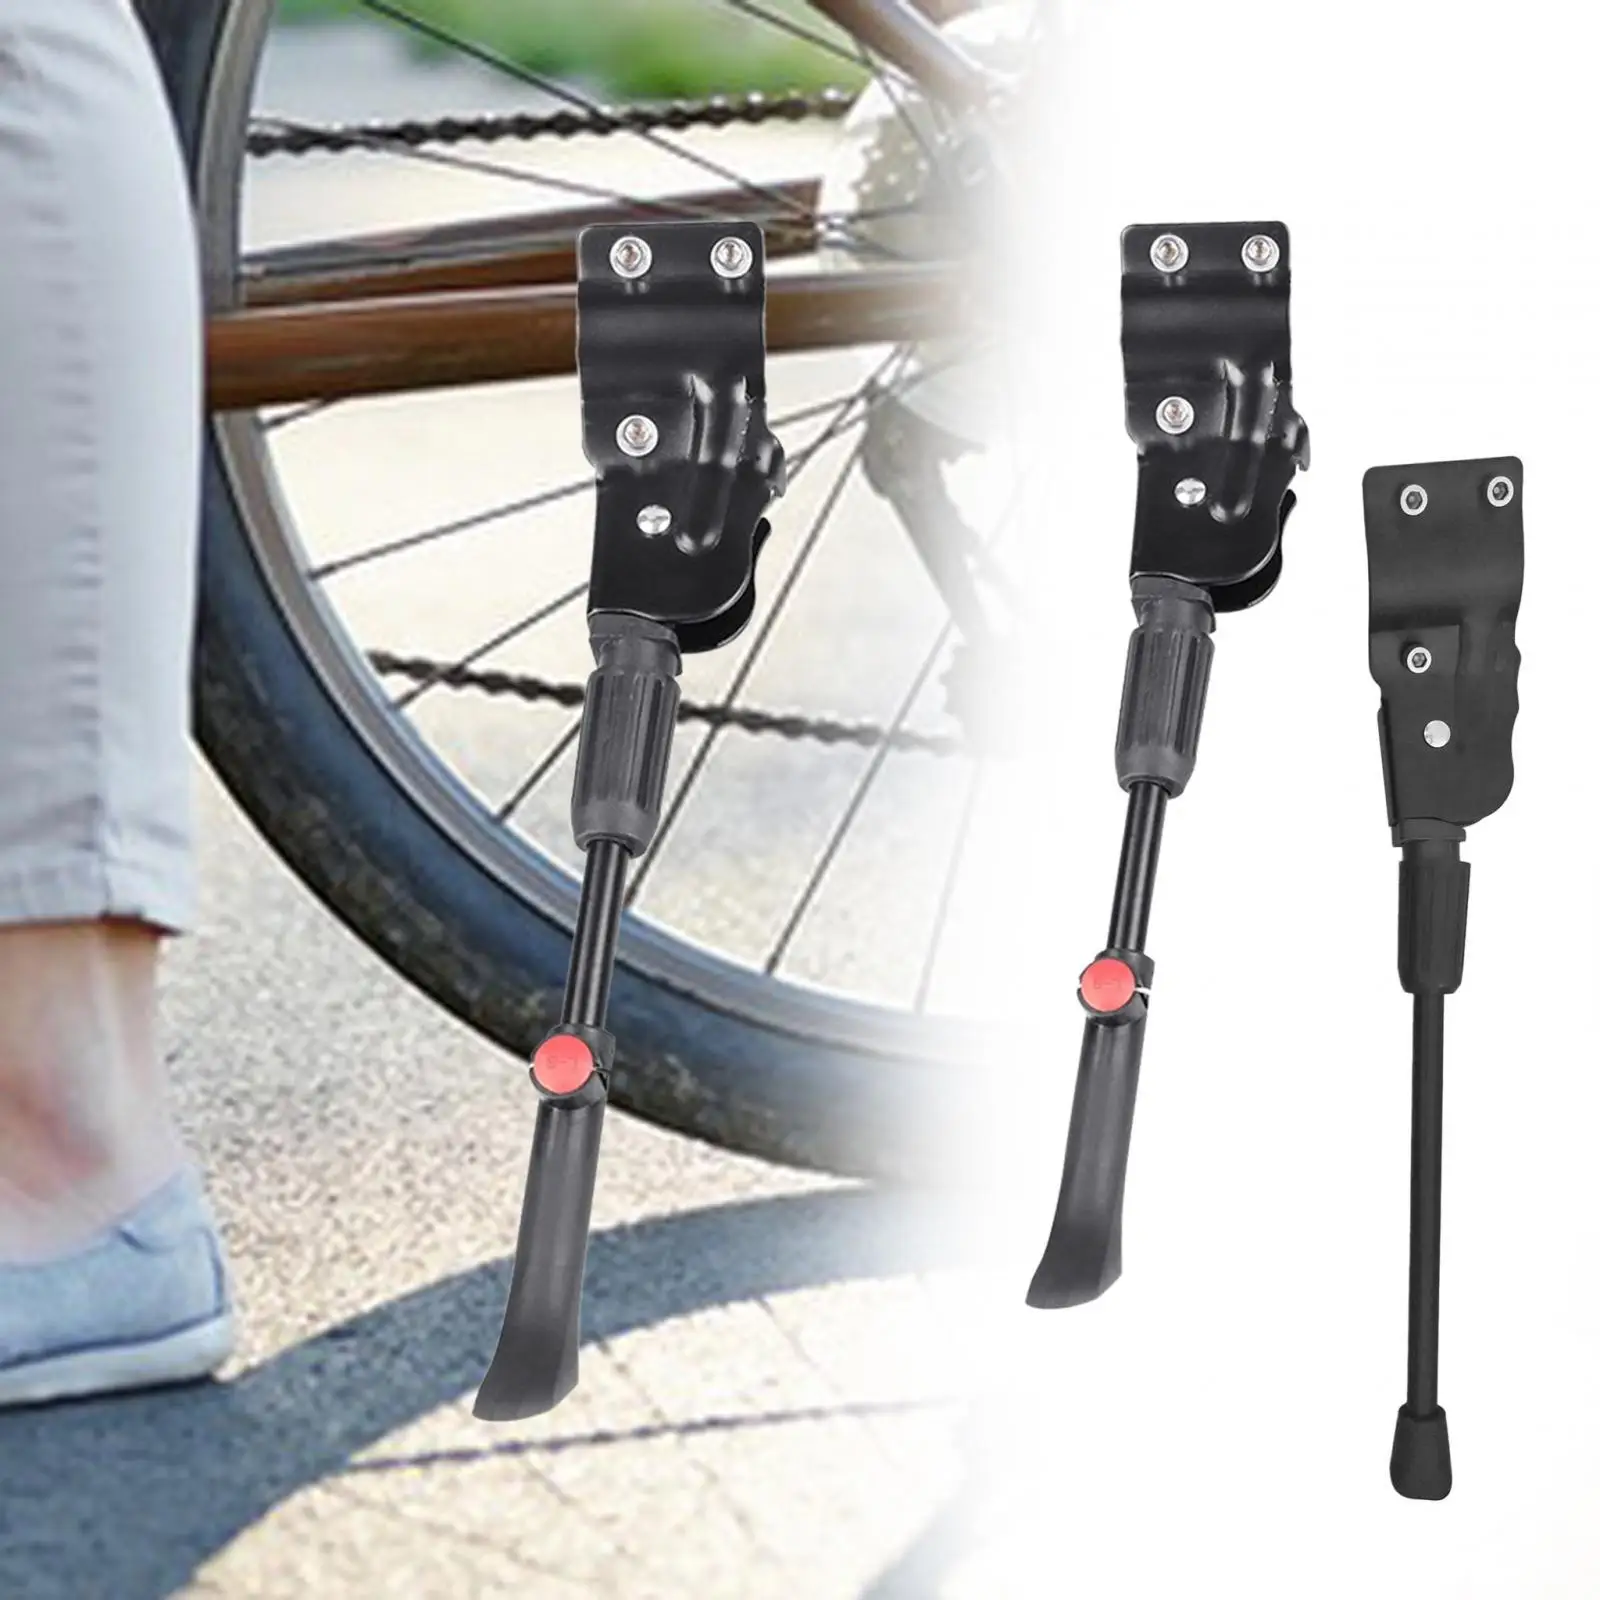 Bicycle Kick Stand Adjustable Height Side Stand Bike Kickstand Rear for Mountain Bike BMX Outdoor Riding Road Bike Adults Bike